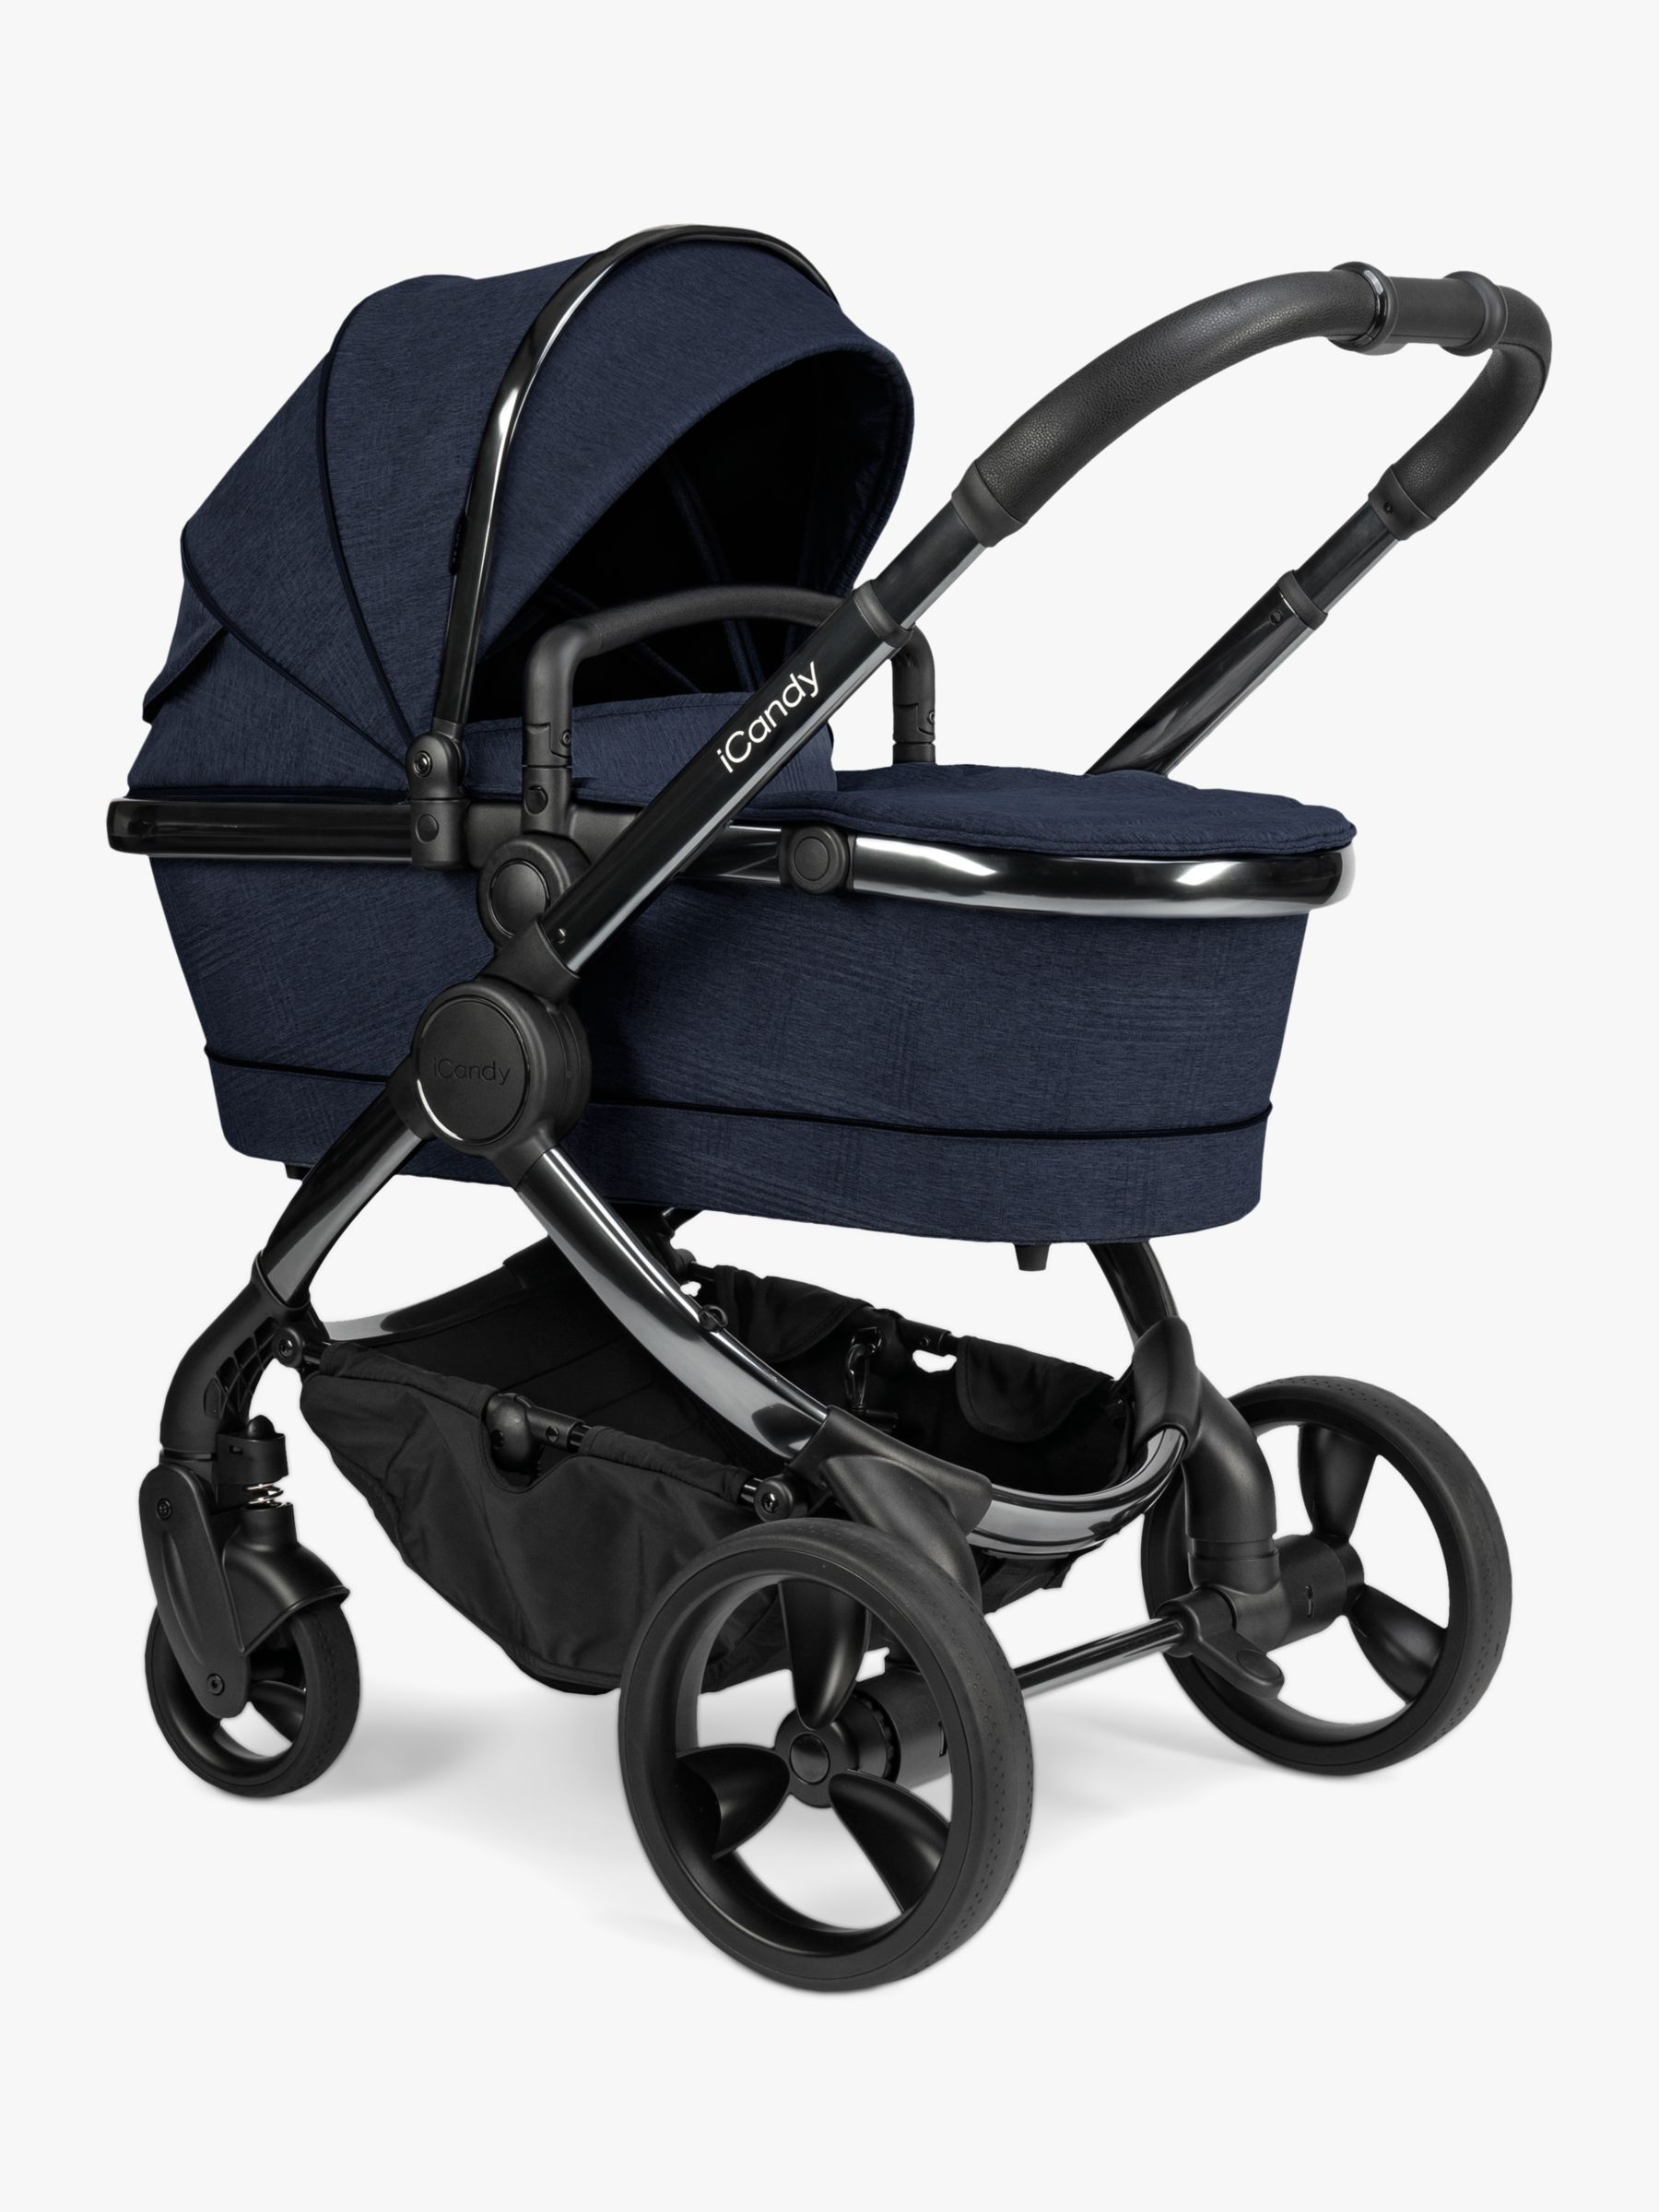 icandy peach carrycot assembly